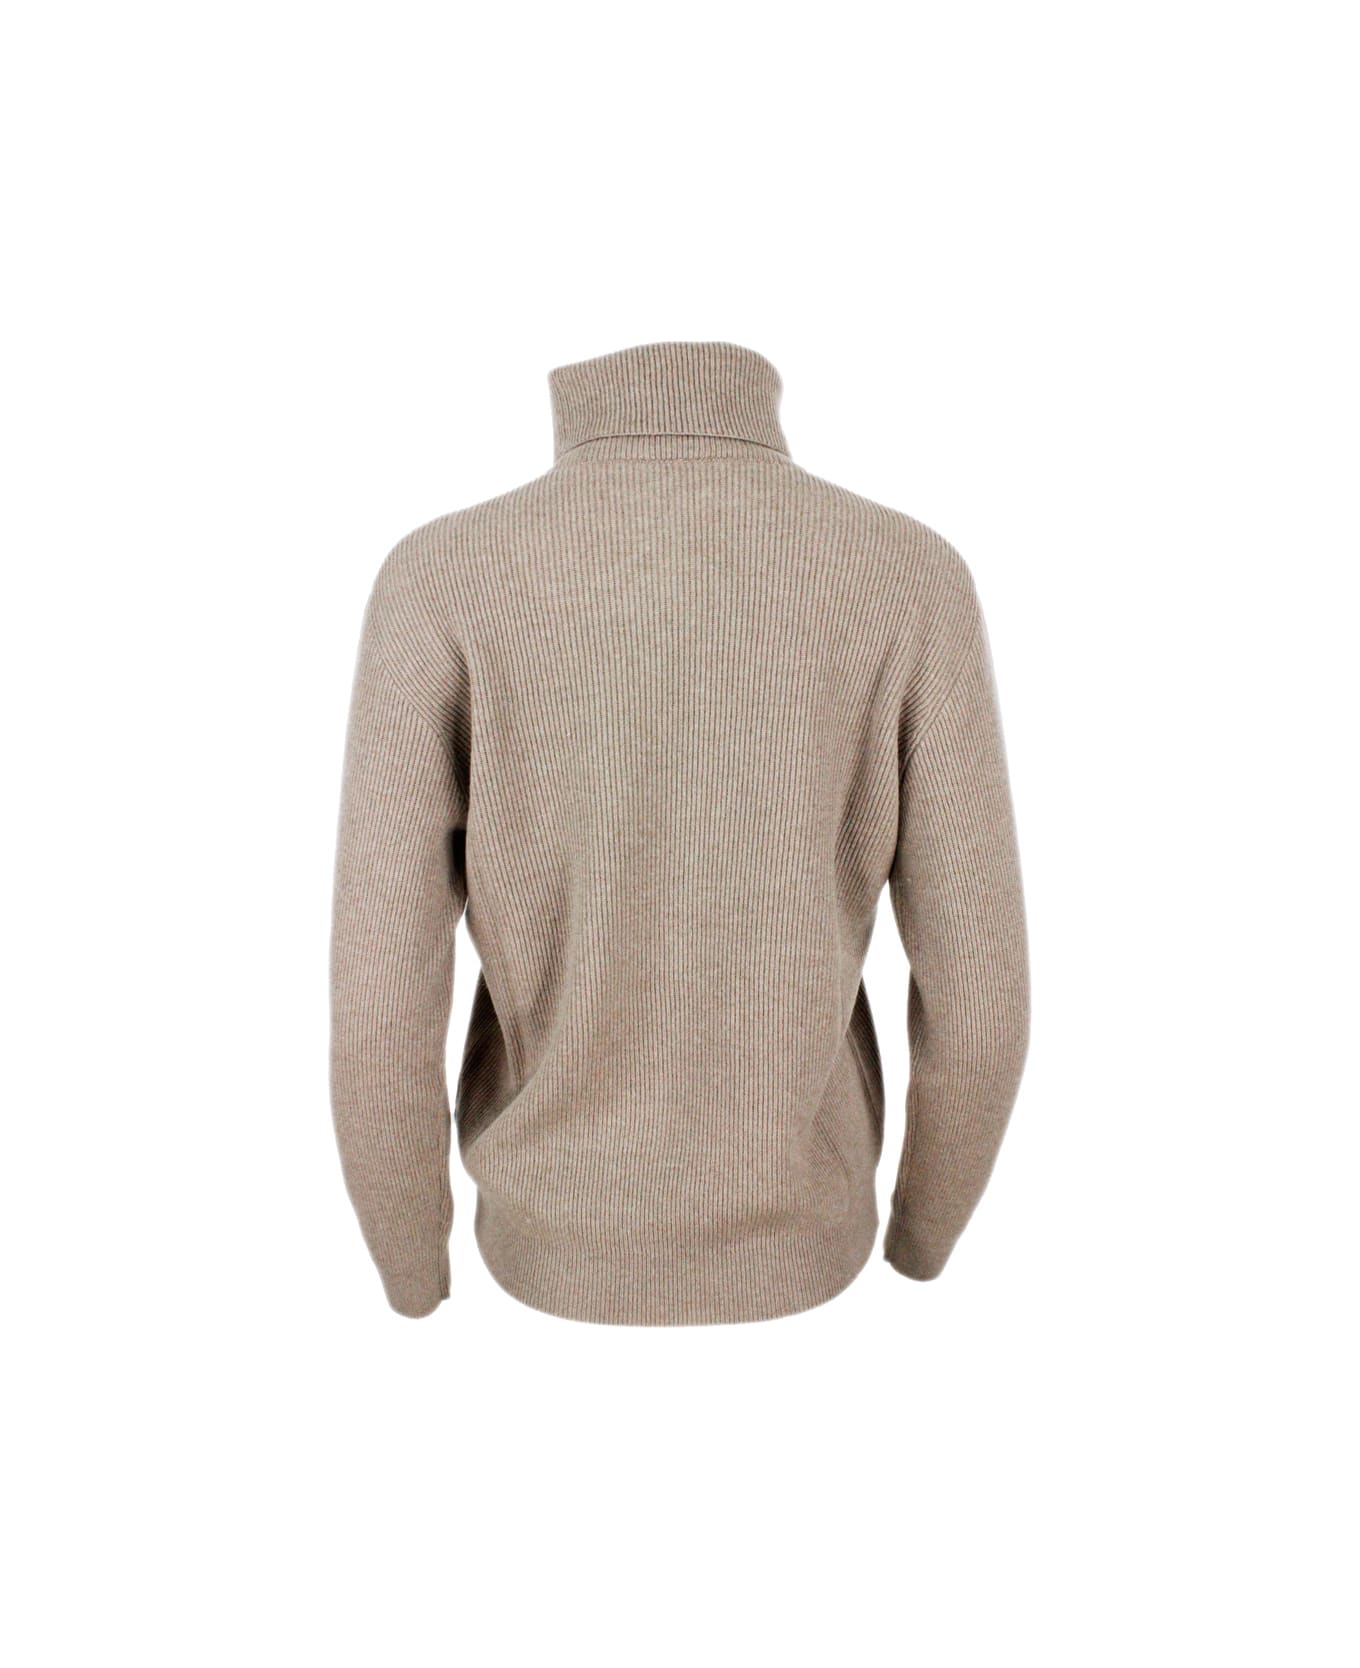 Brunello Cucinelli High Neck Sweater In Soft And Pure Cashmere Half English Rib With Monili Detail On The Neck In The Back - Tobacco